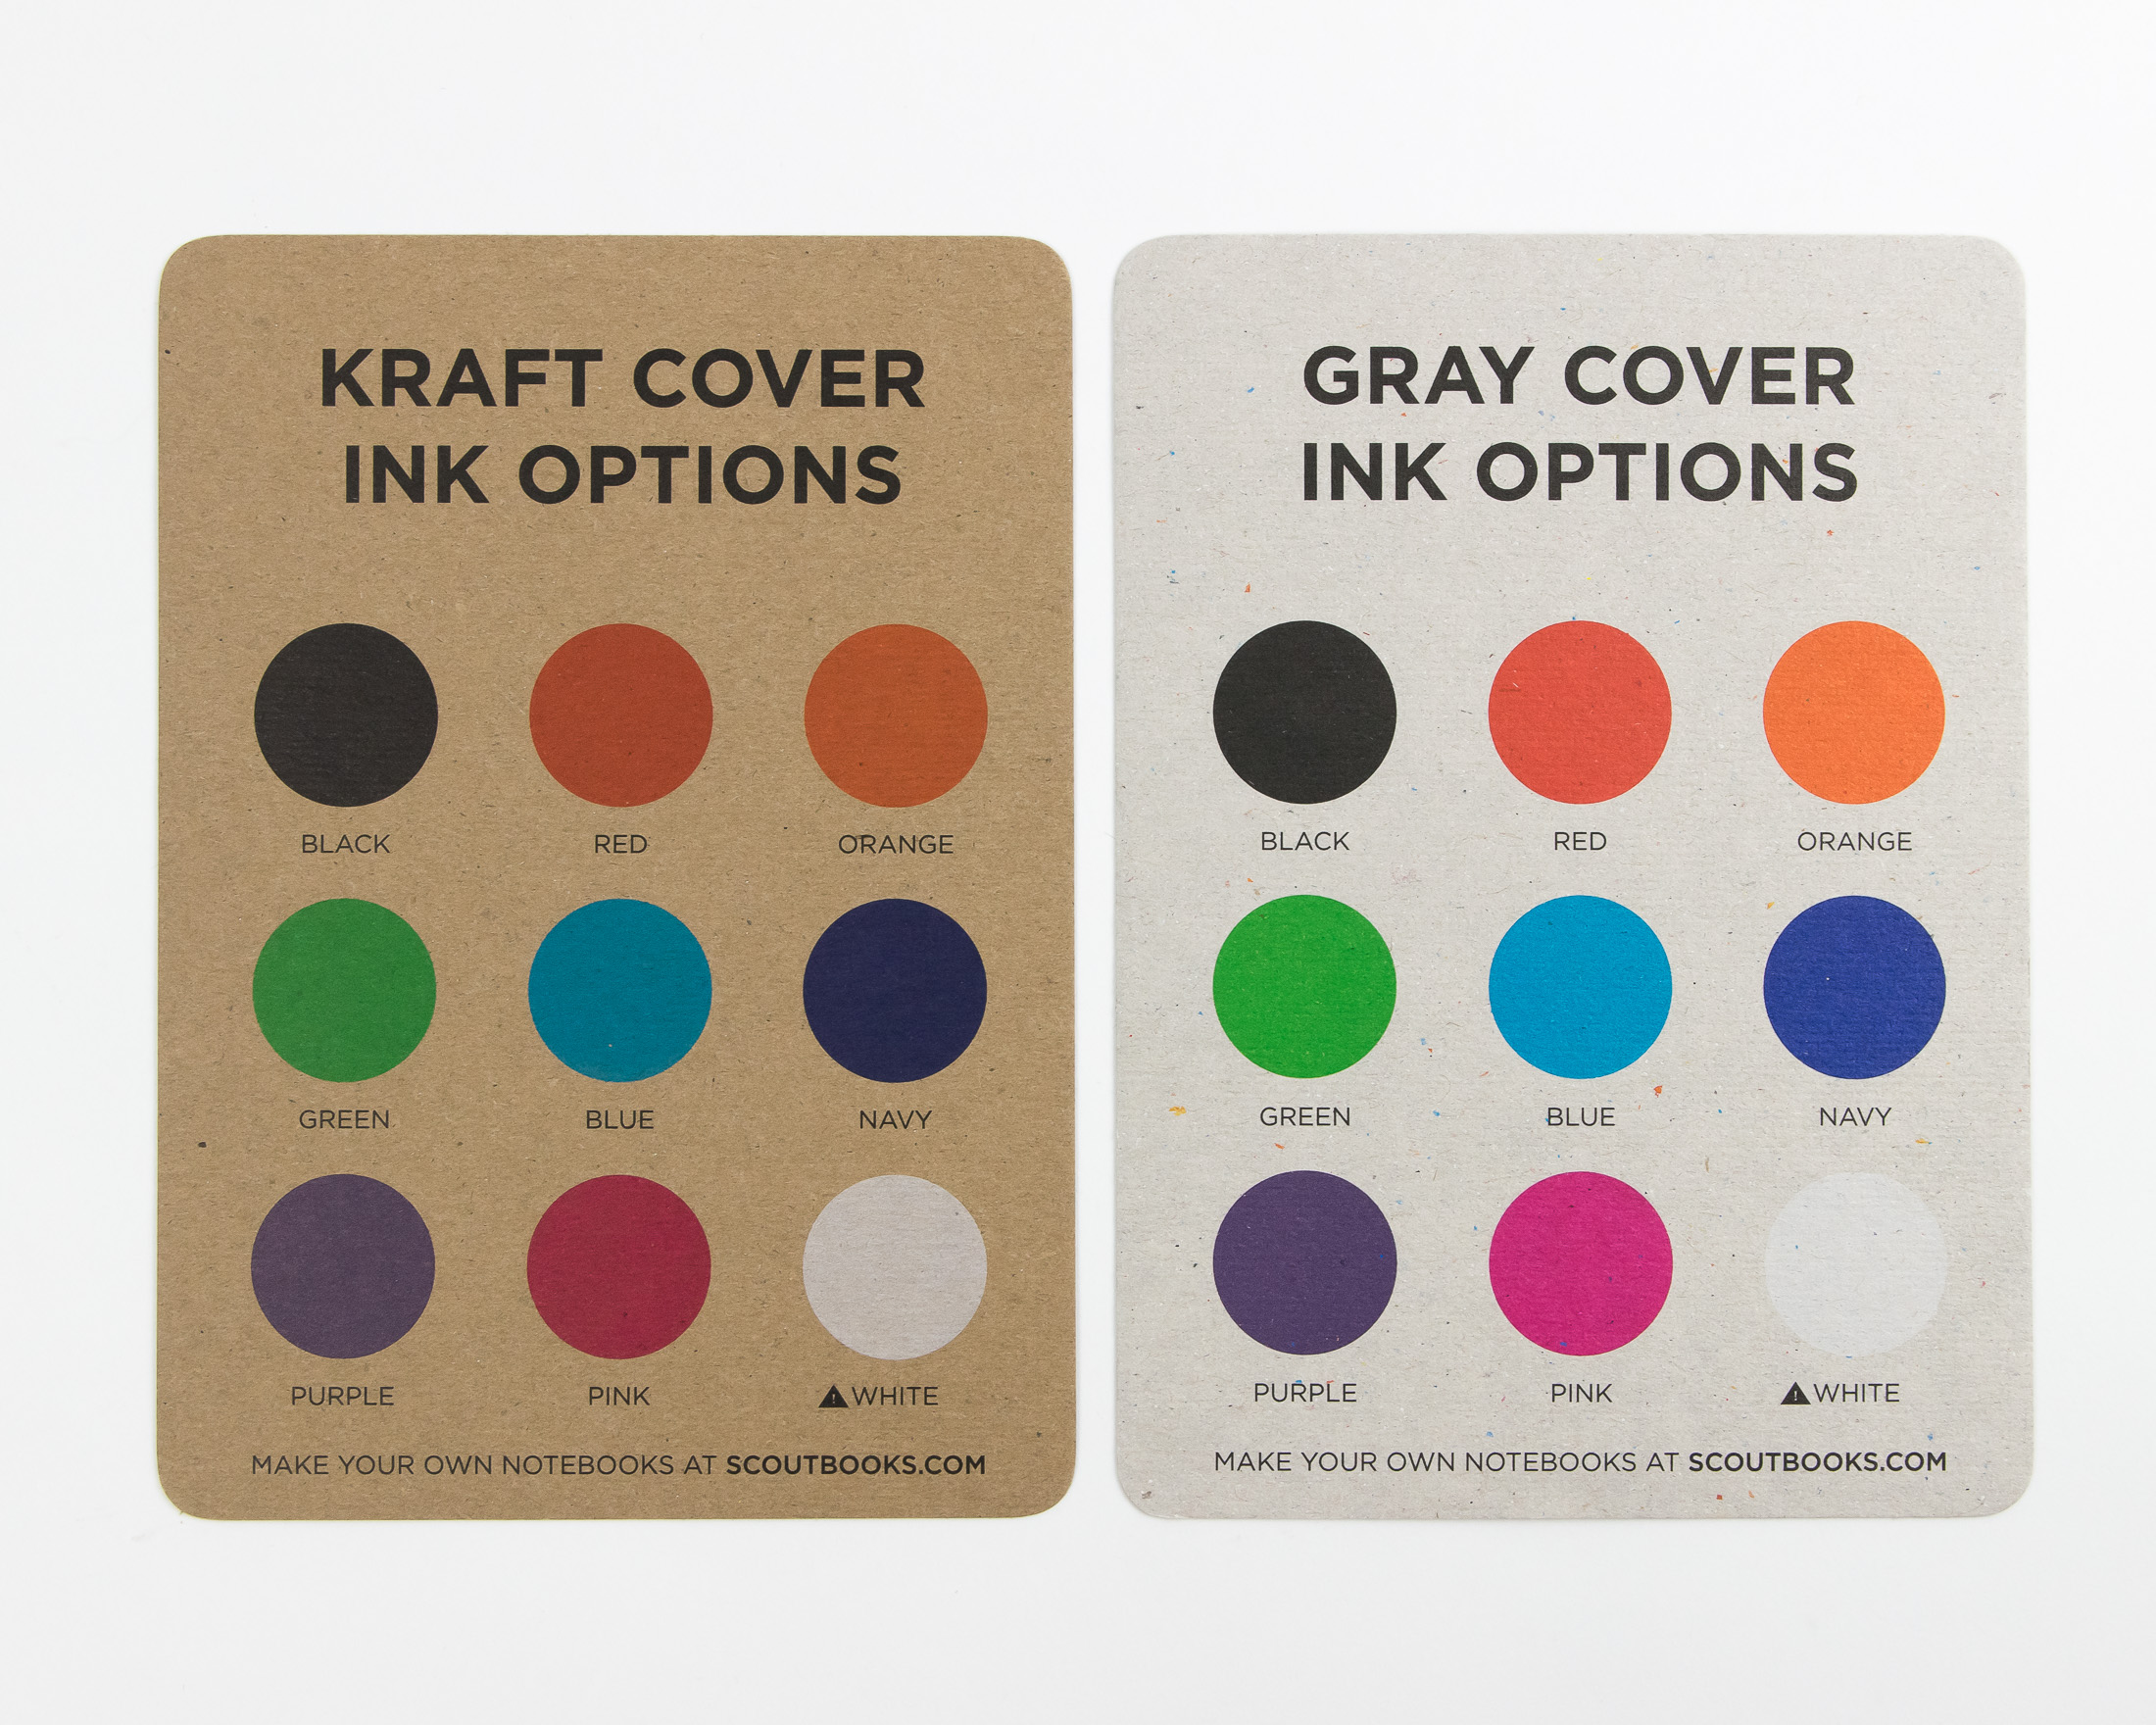 New Colors New Covers